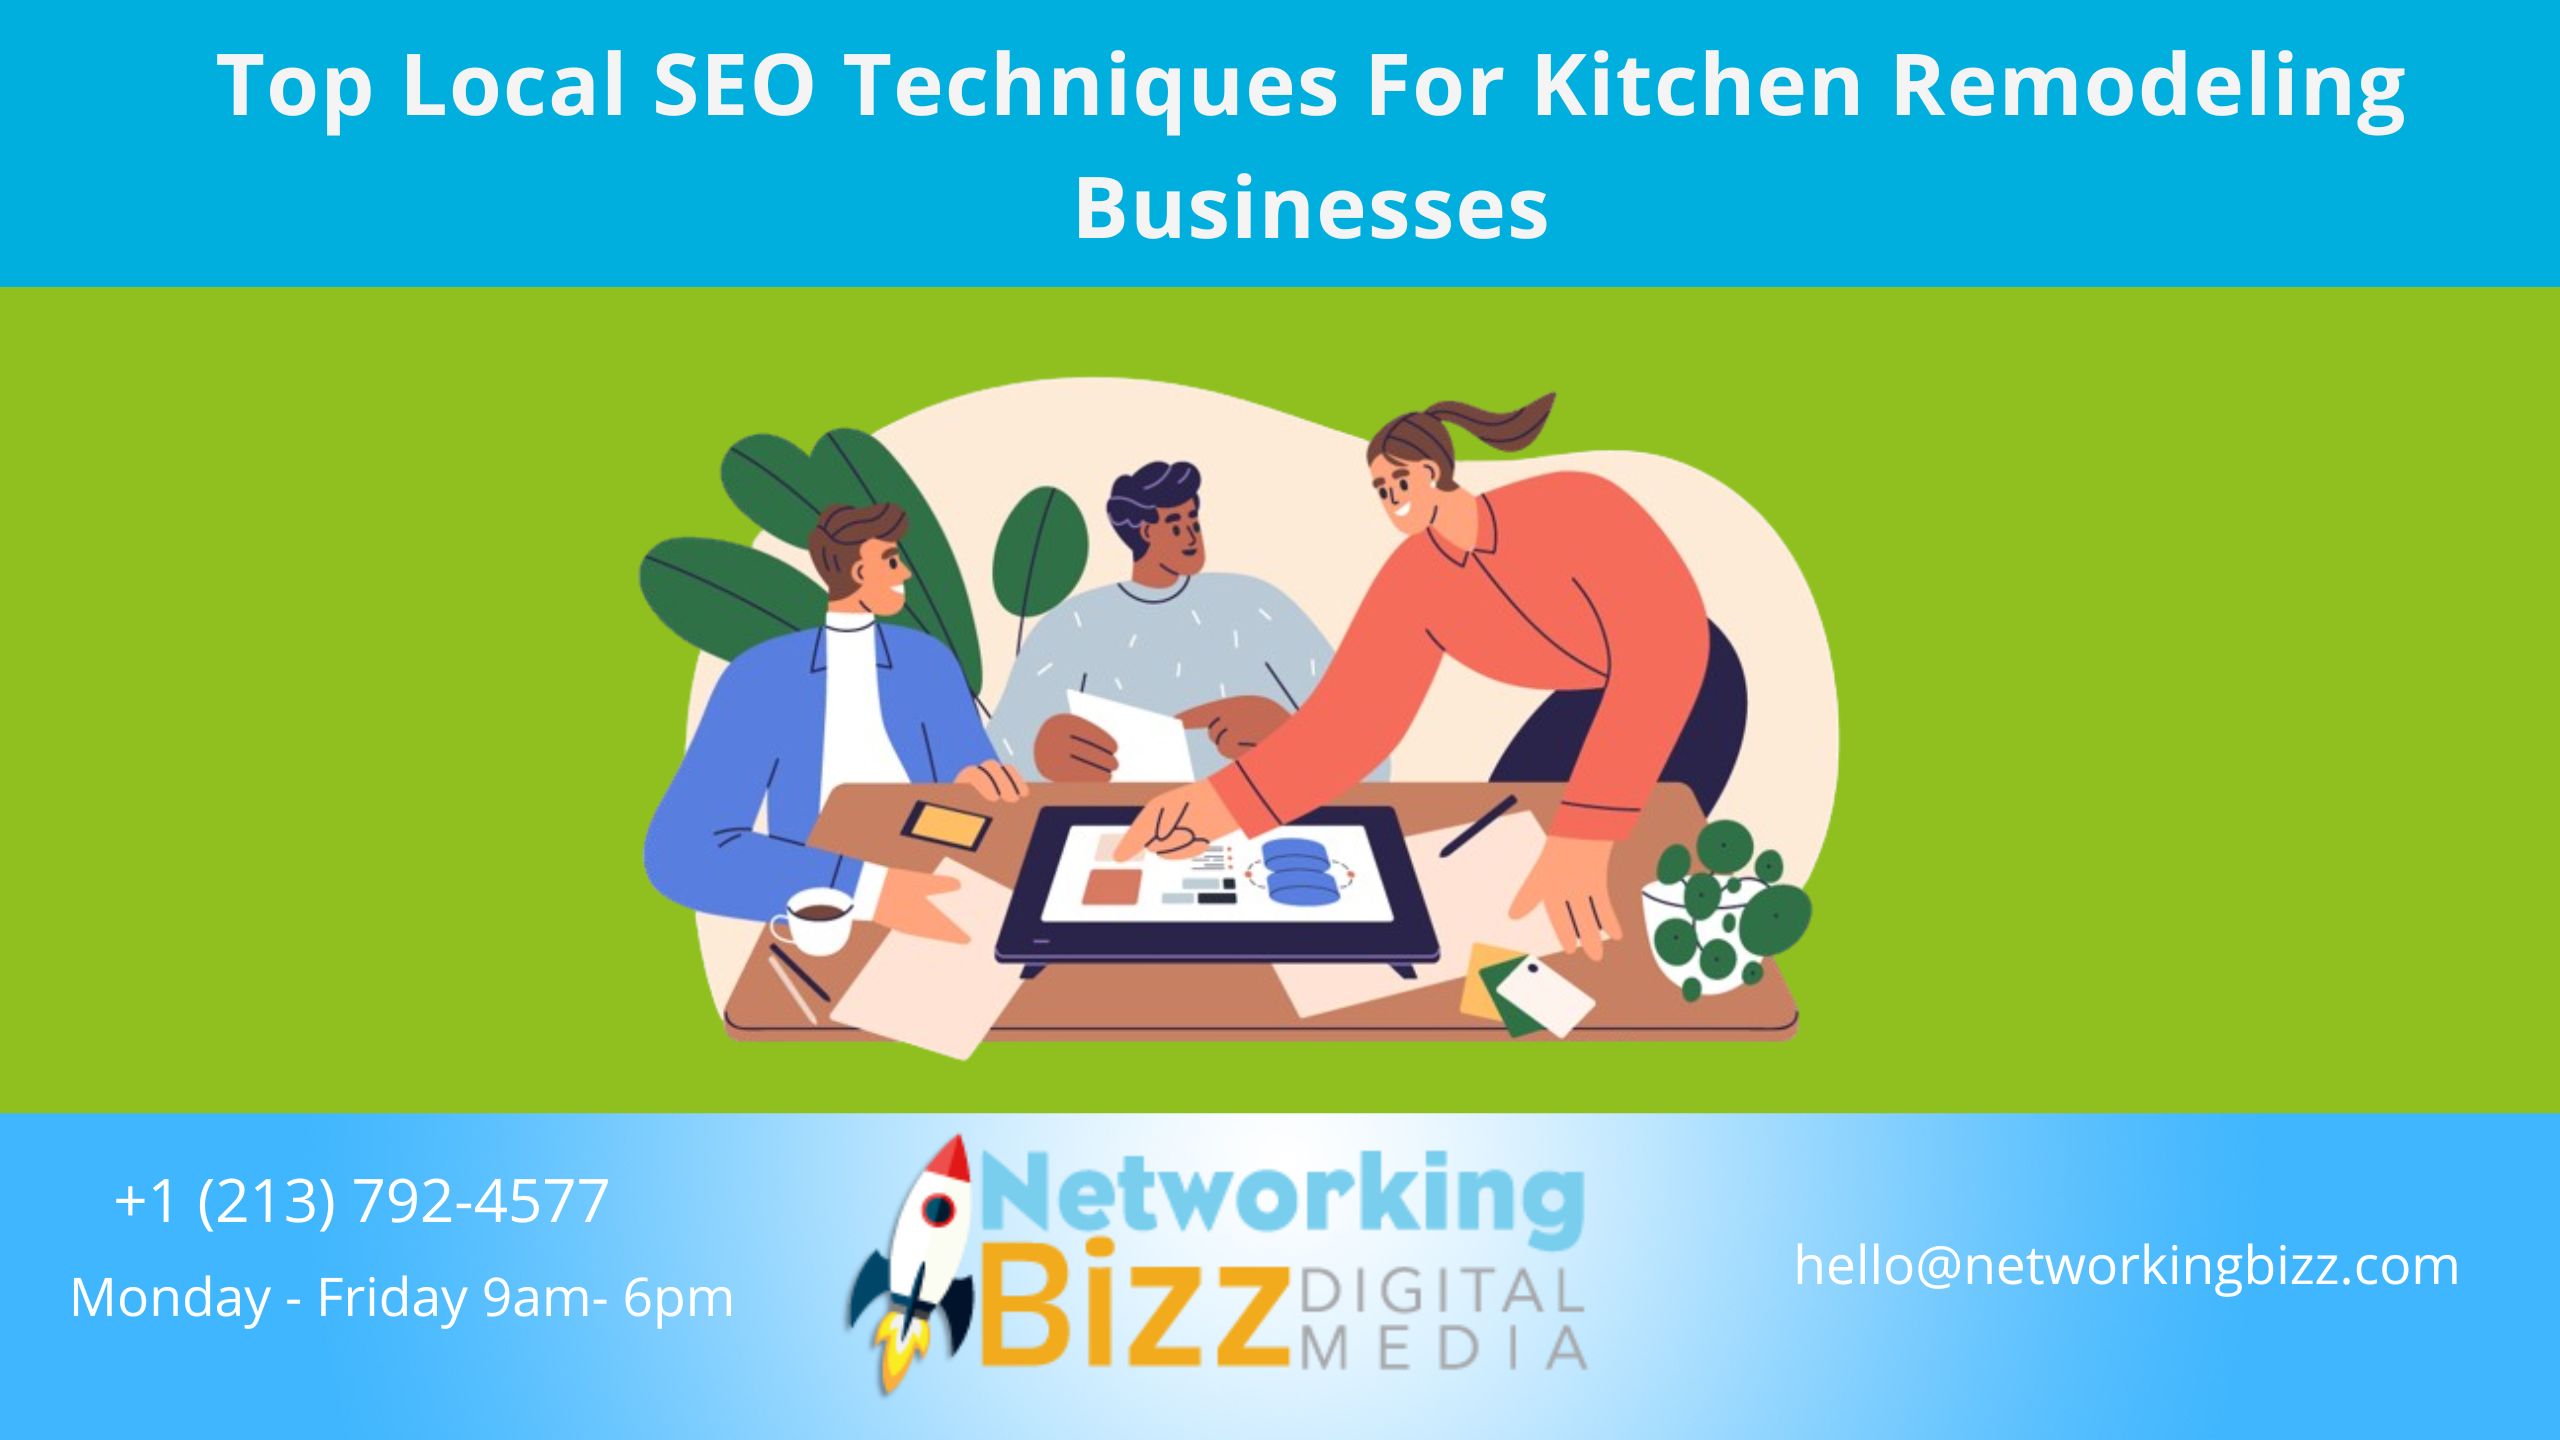 Top Local SEO Techniques For Kitchen Remodeling Businesses